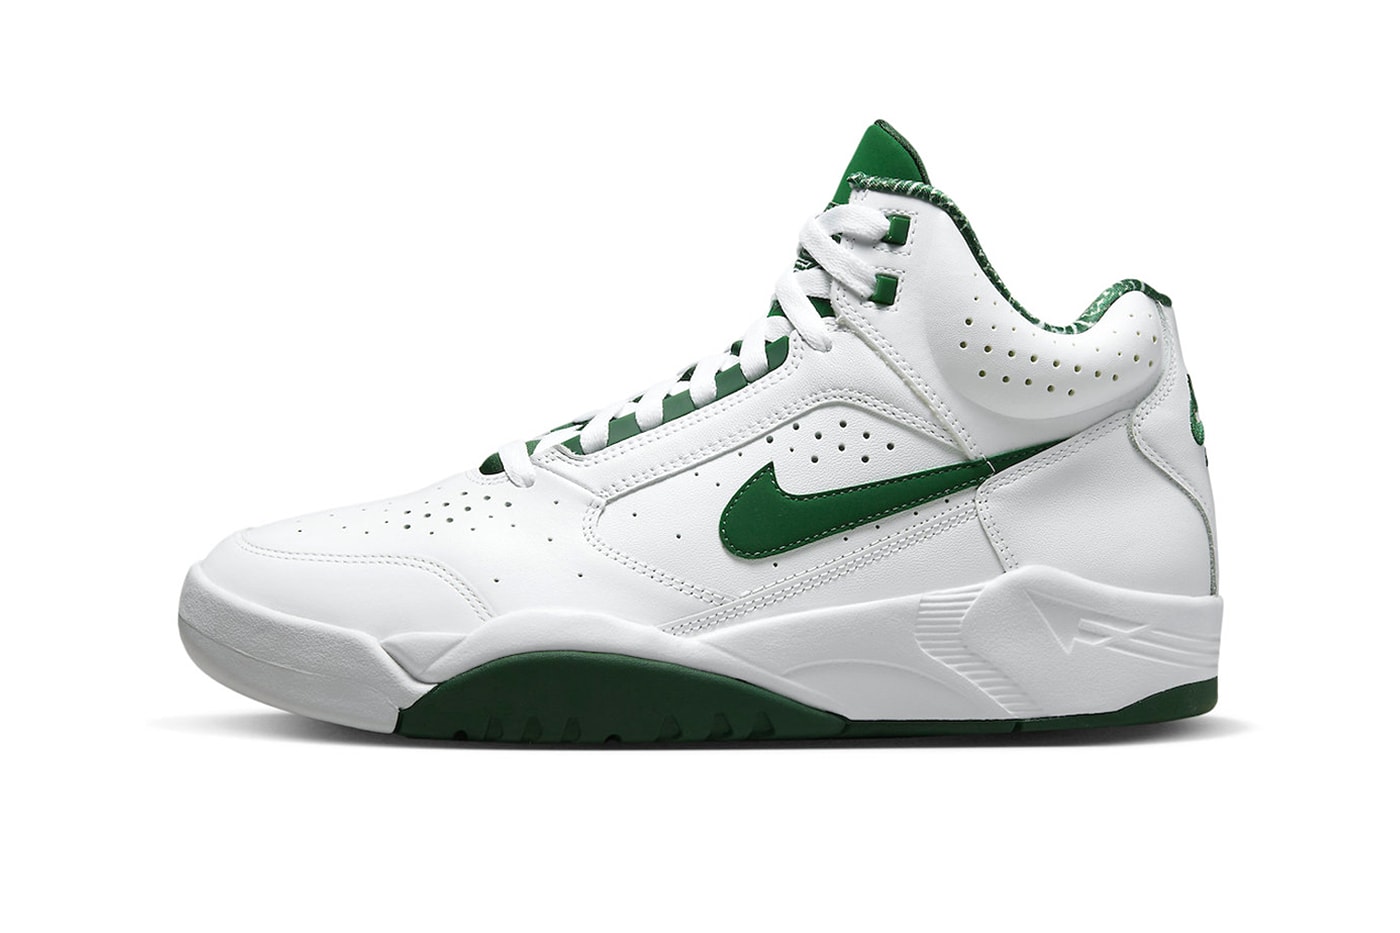 Nike Air Flight Lite Mid Gorge Green Official Look Release Info DJ2518-103 Date Buy Price